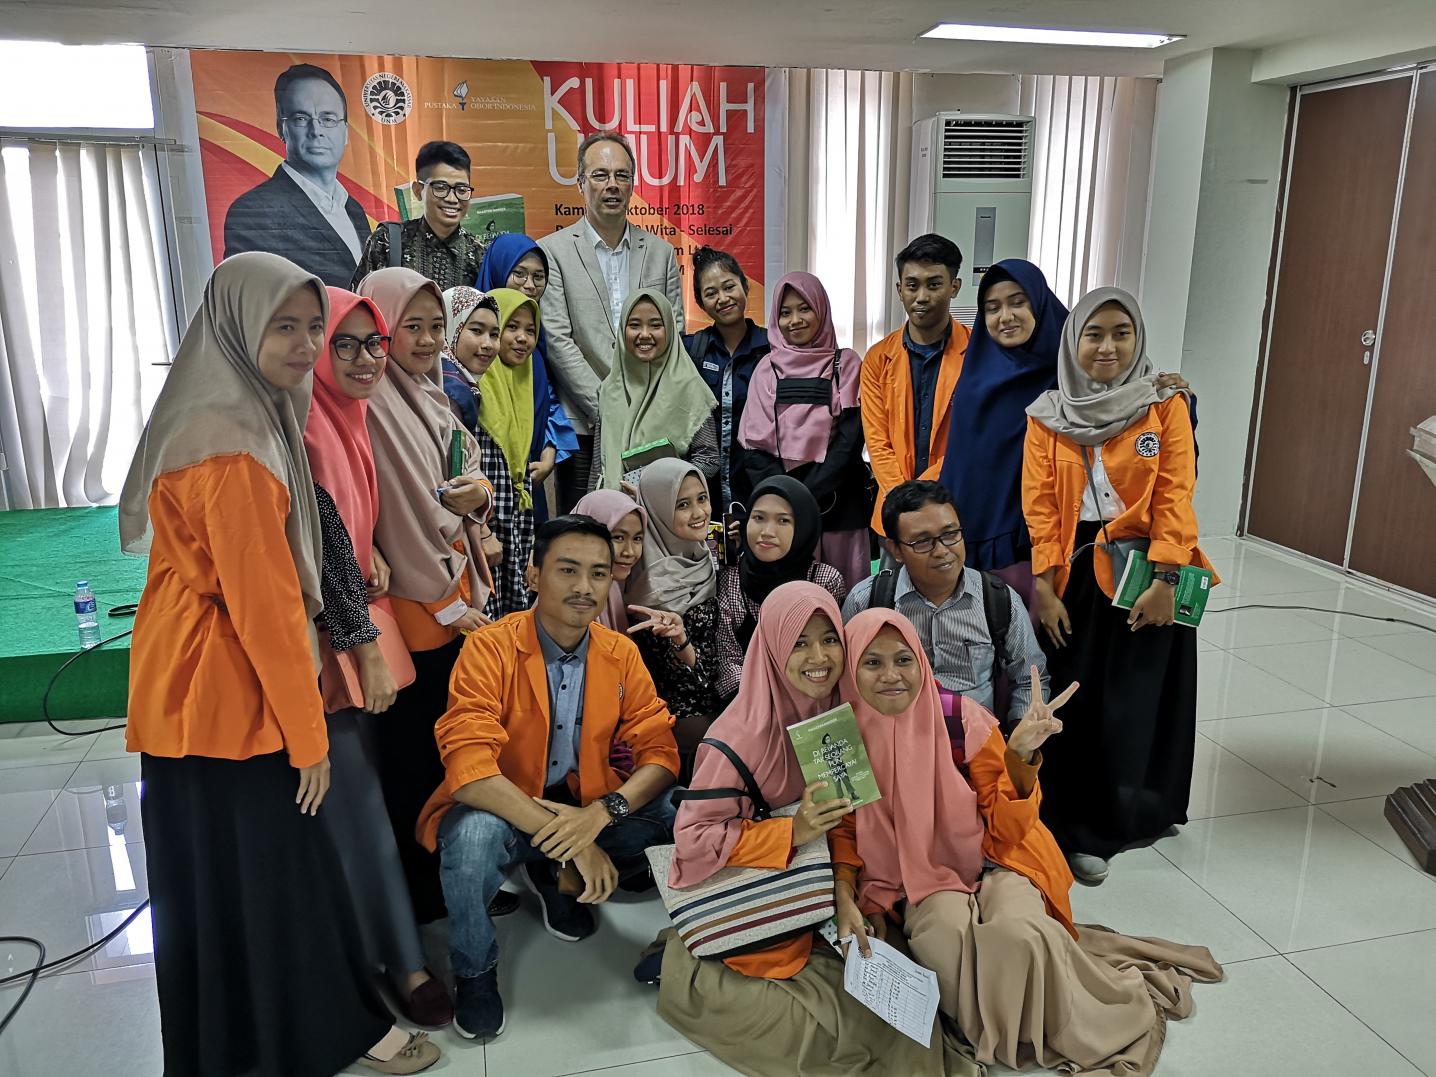 Maarten Hidskes with students in Indonesia